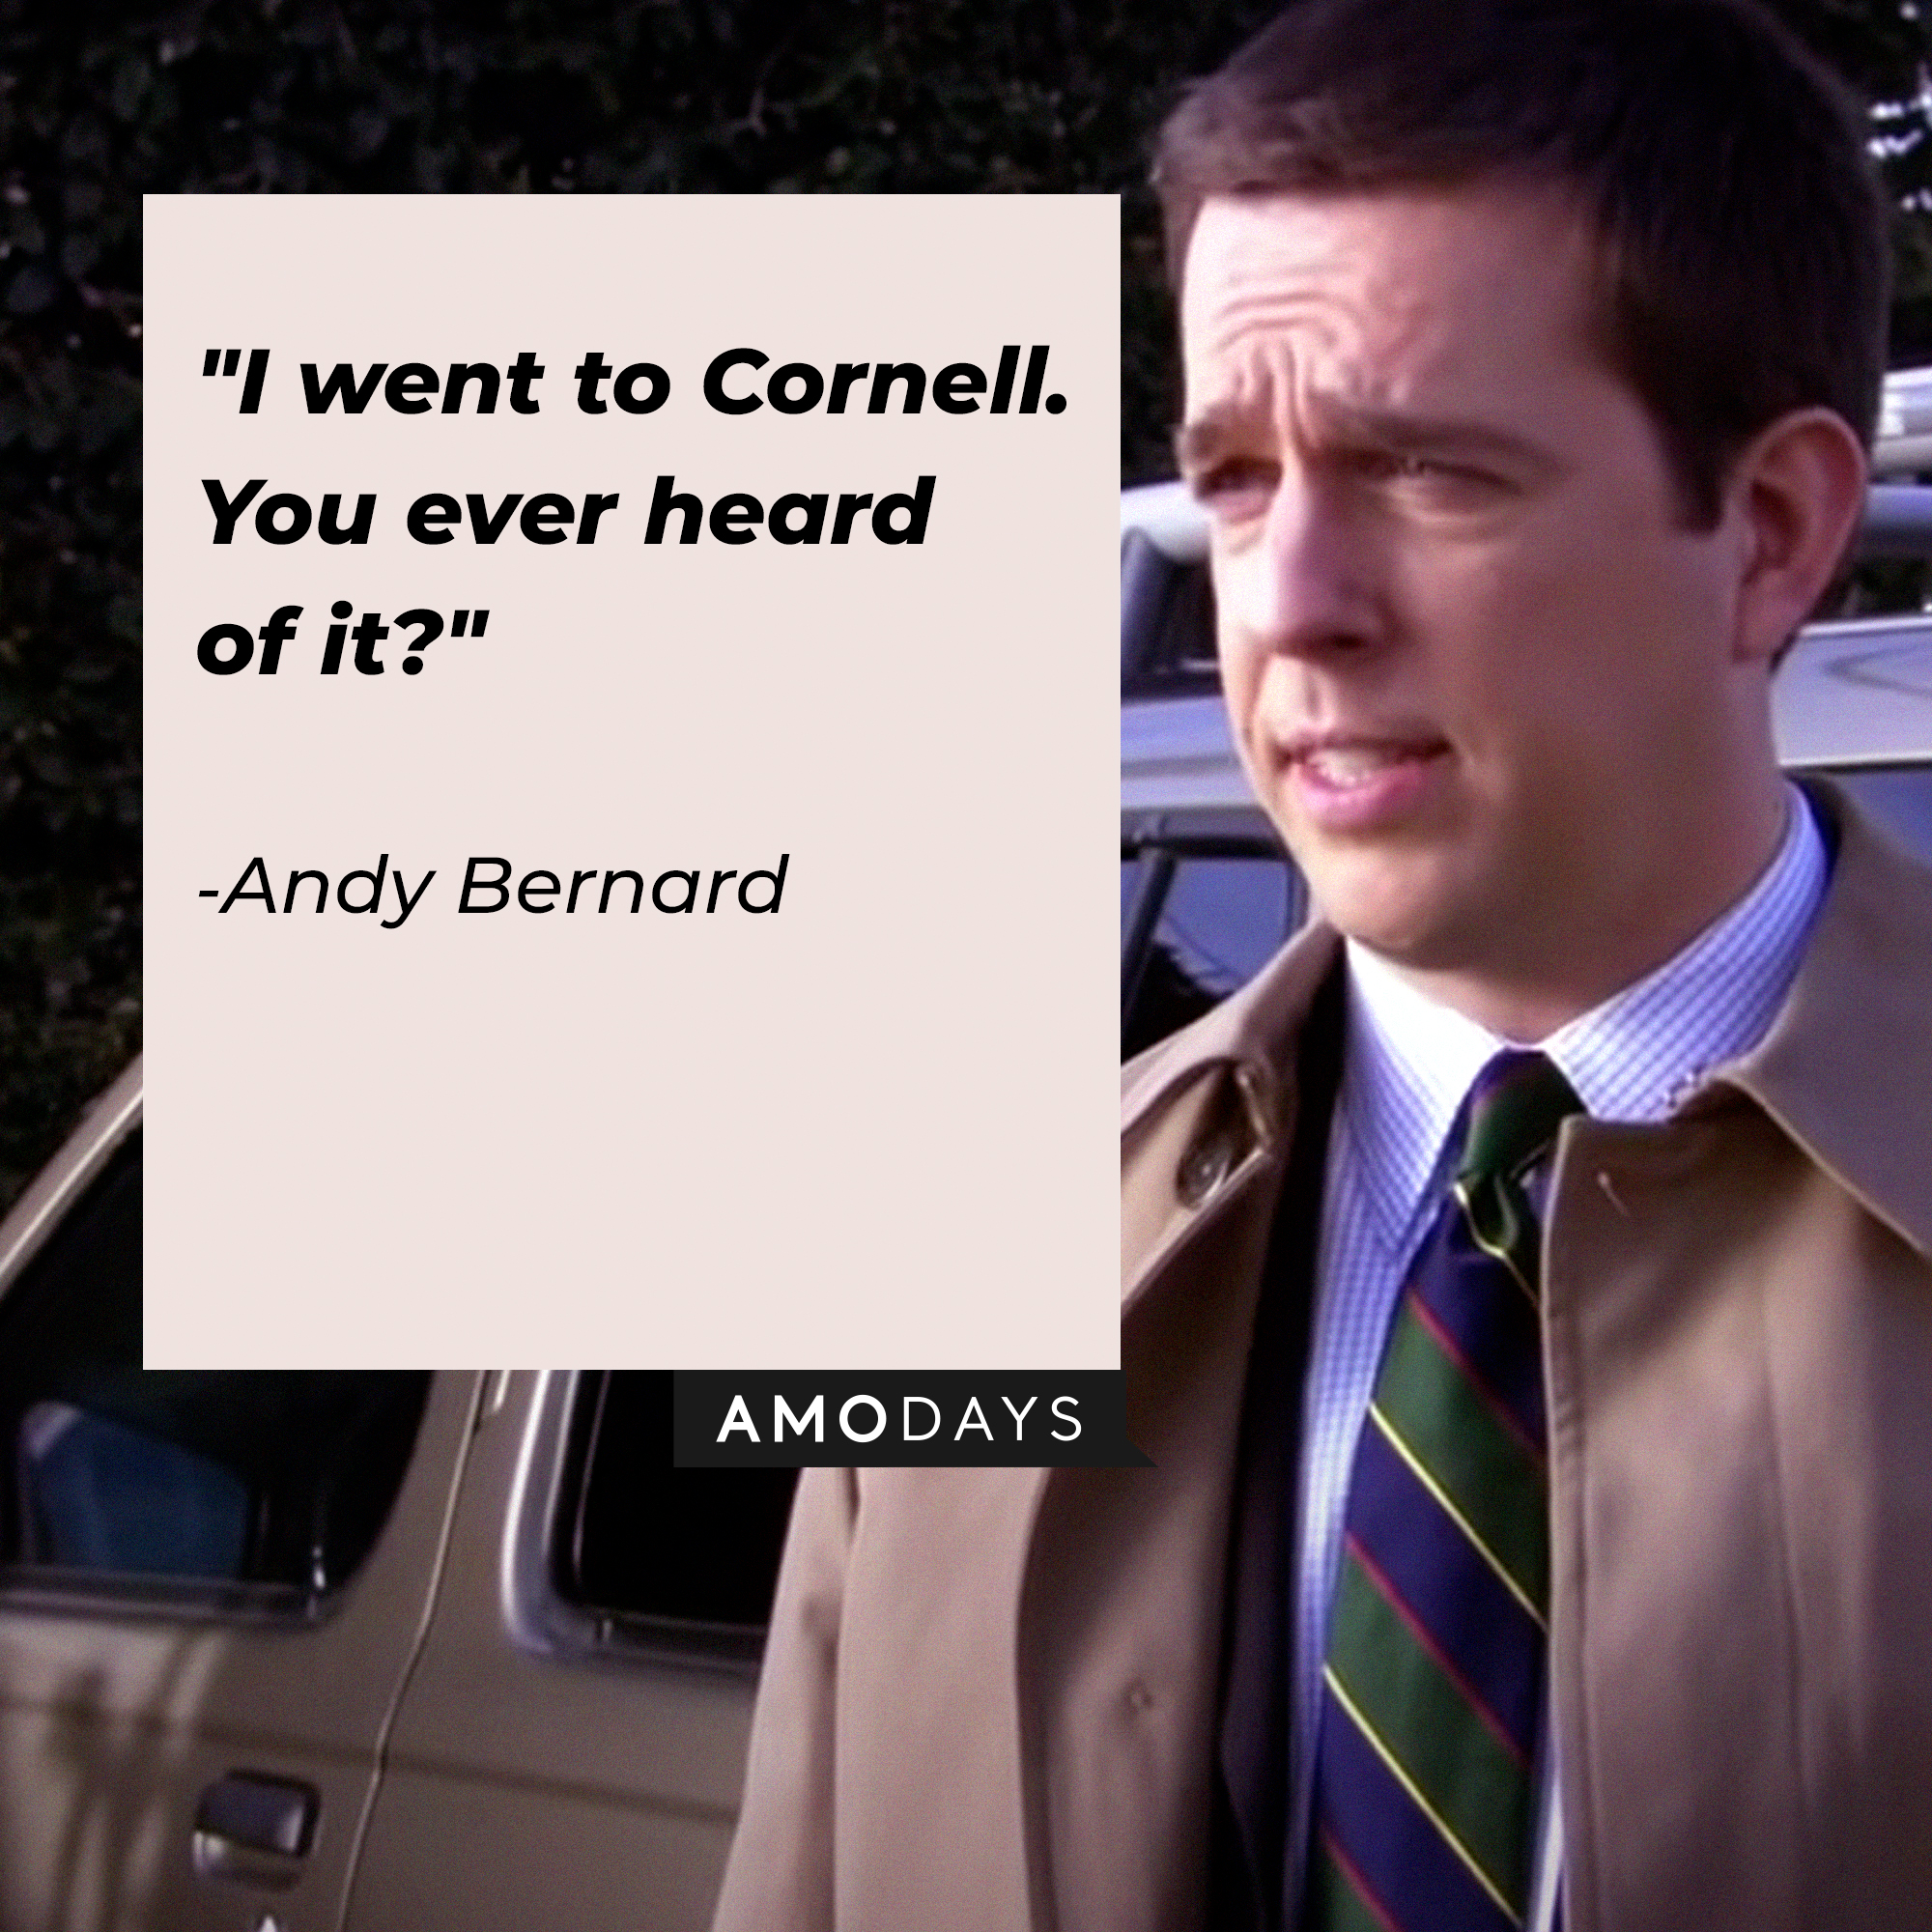 Andy Bernard, with his quote: "I went to Cornell. You ever heard of it?"│ Source: youtube.com/TheOffice